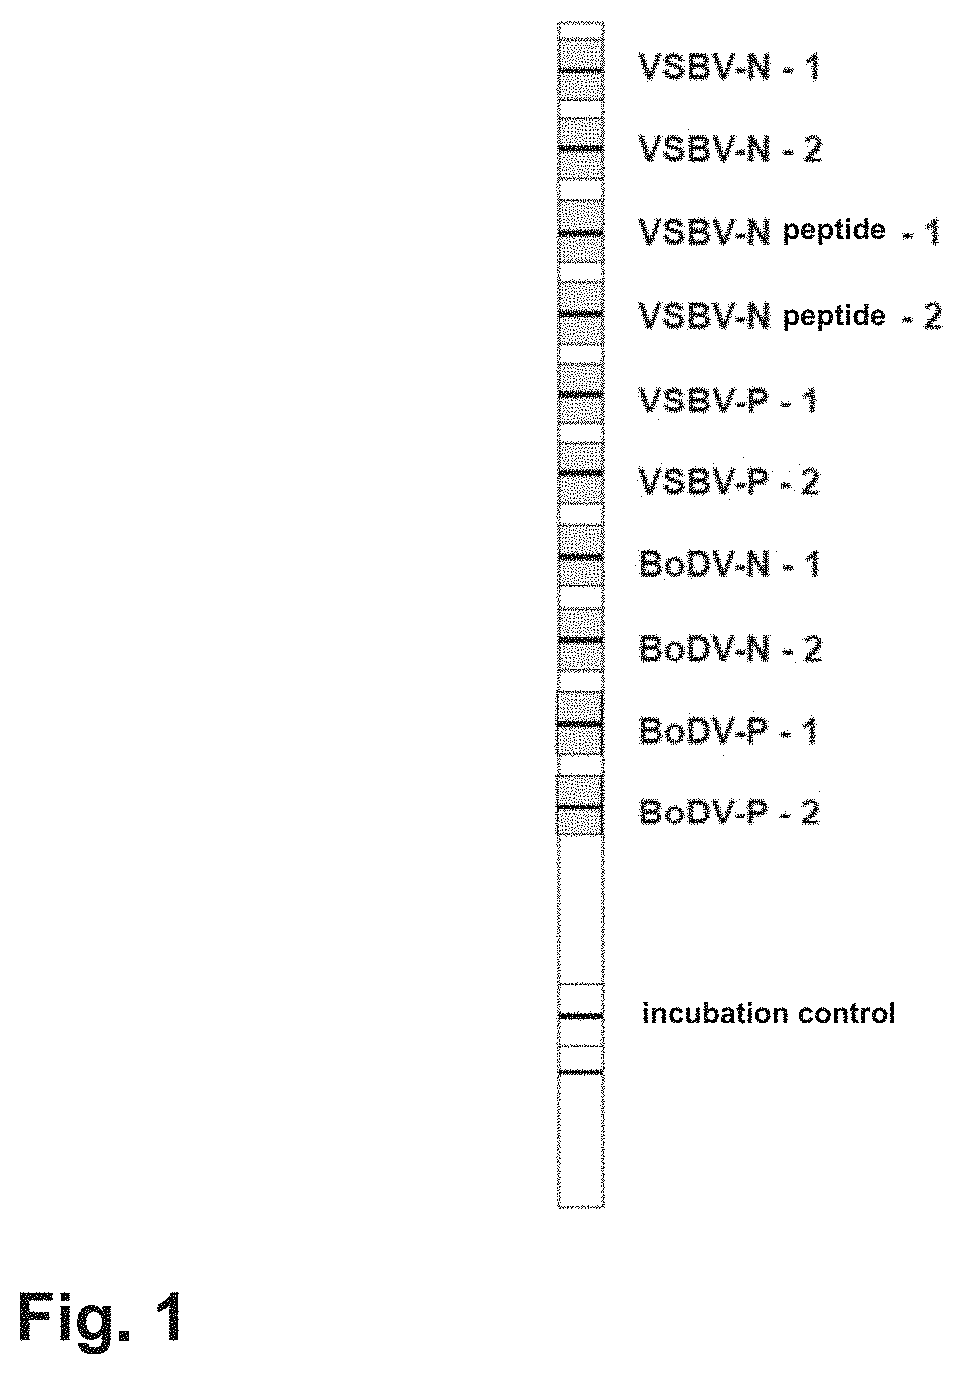 Method for the diagnosis of bornavirus infection